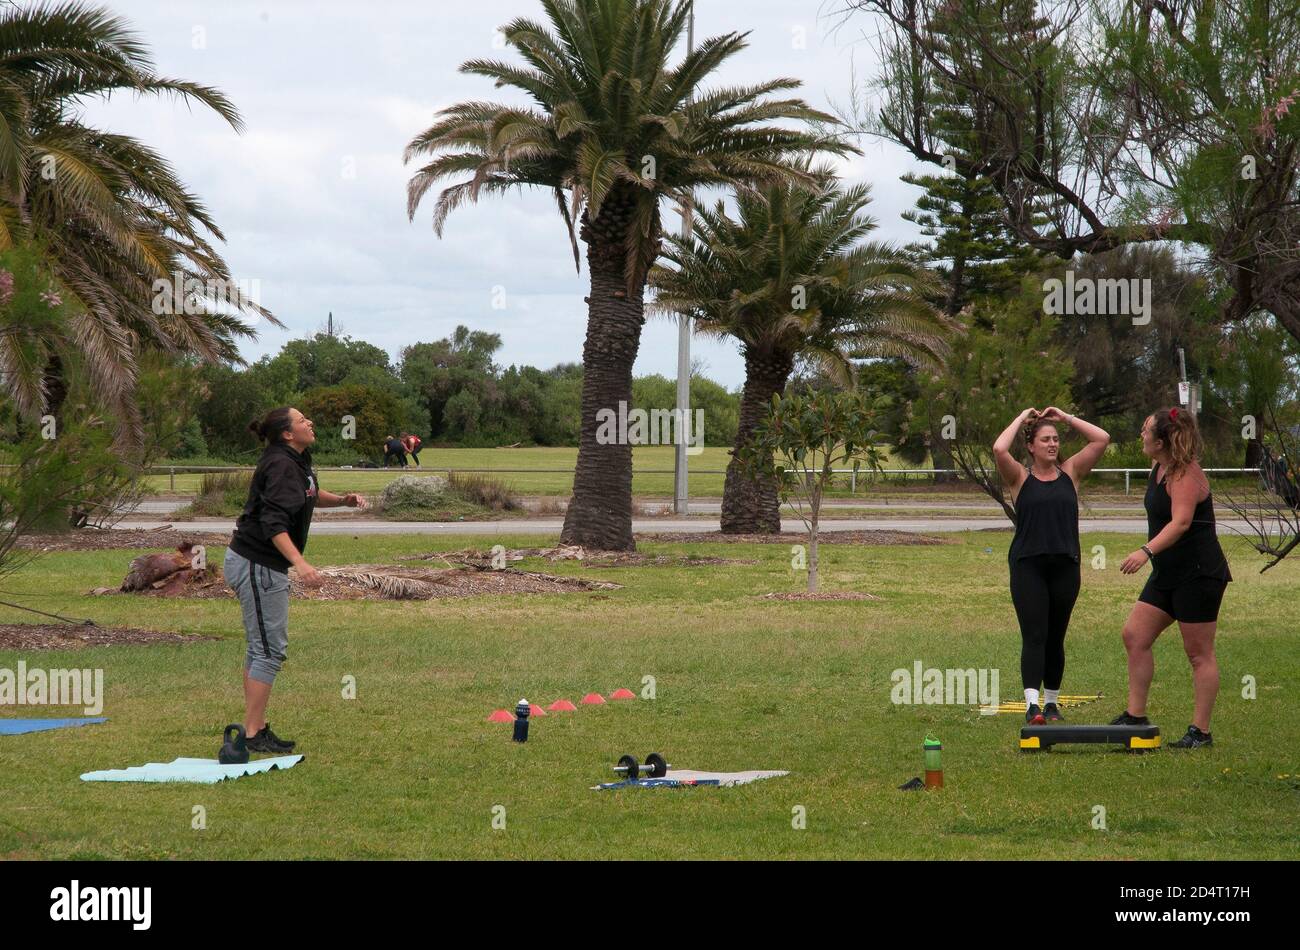 People exercising in a public park during the 2020 pandemic lockdown, Melbourne, Australia, whilst indoor gyms and classes remain closed. Stock Photo